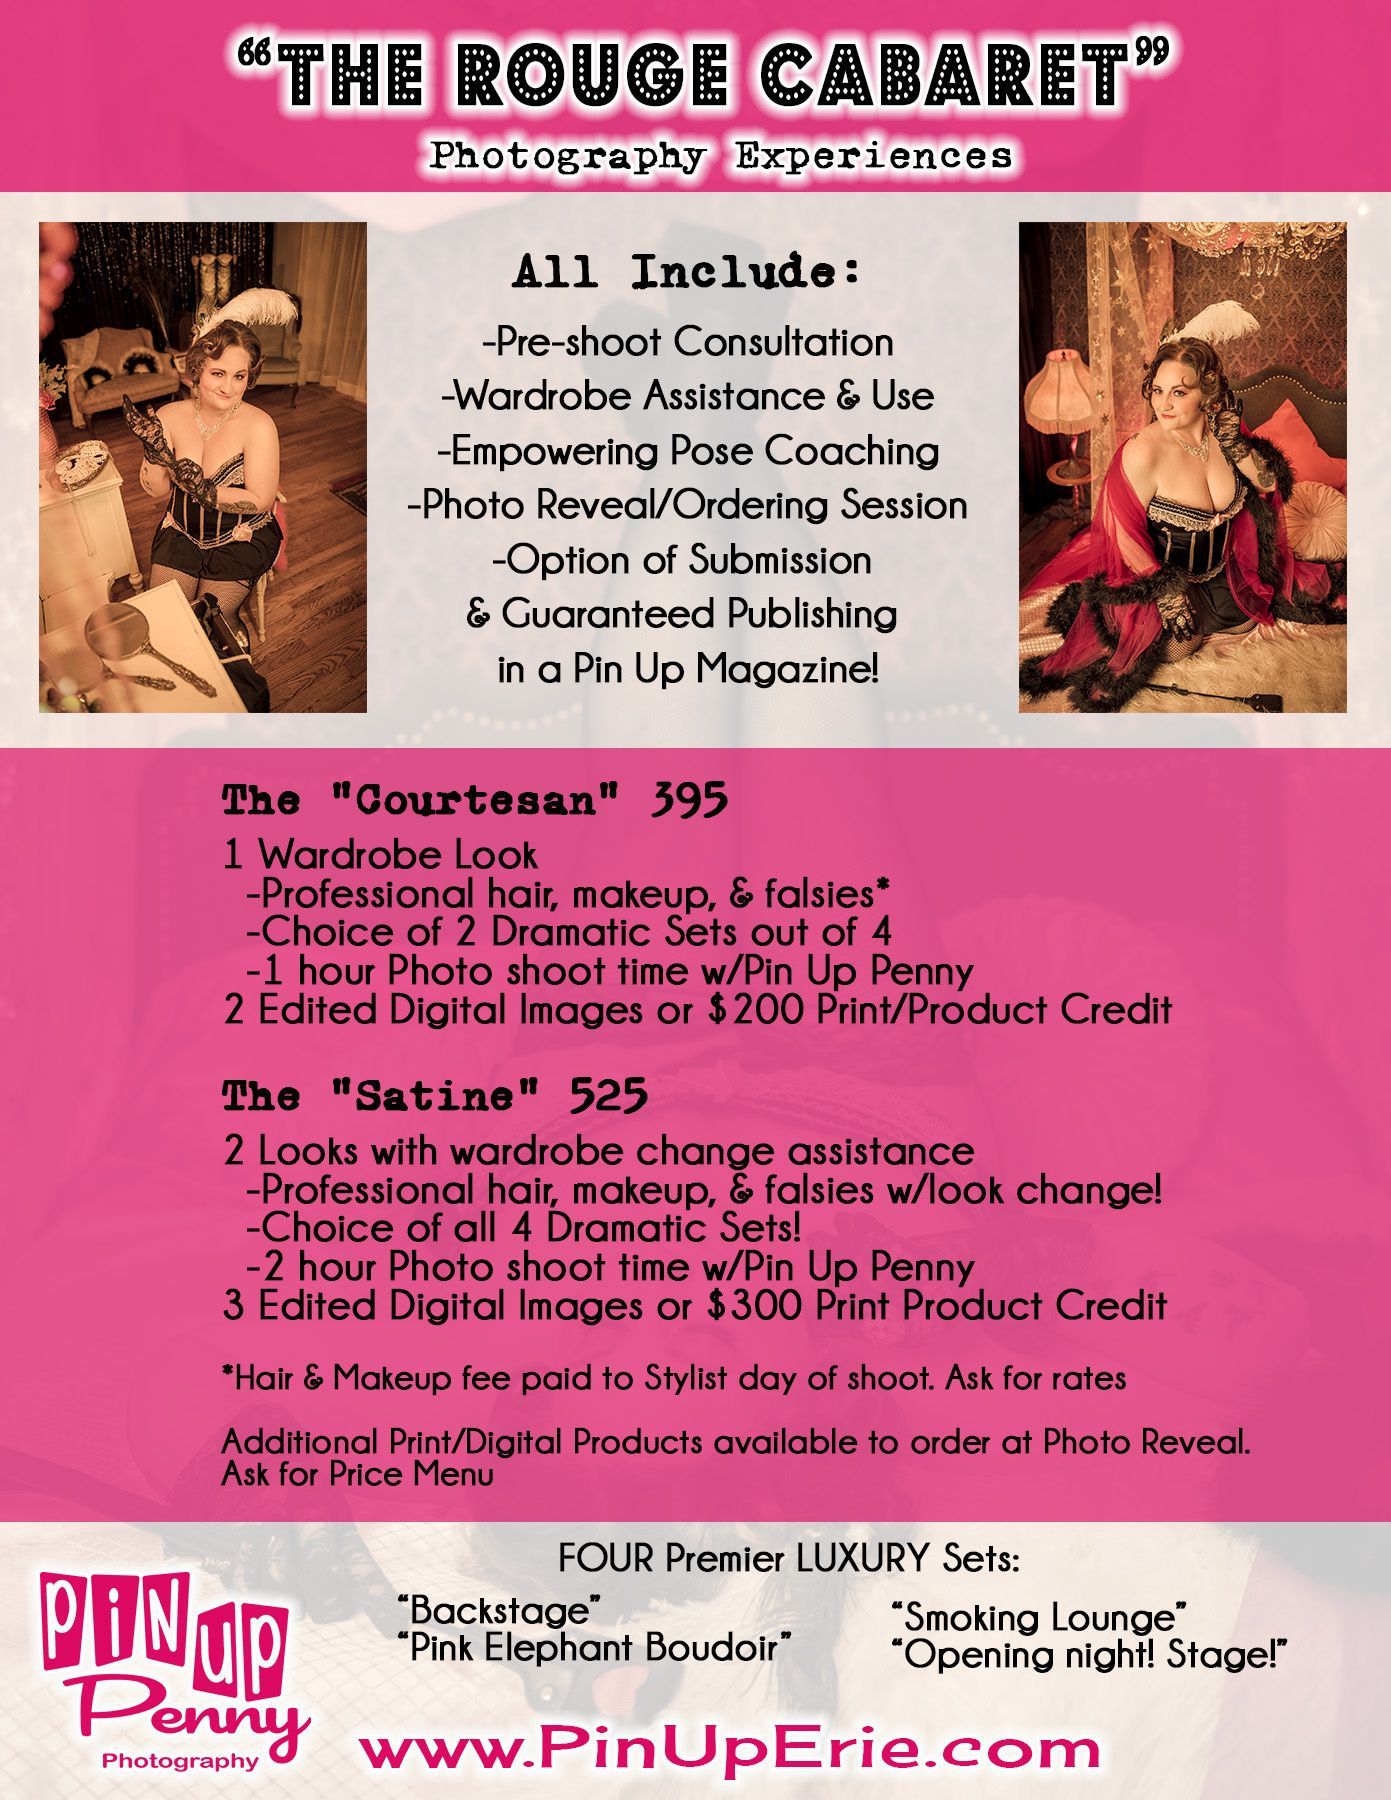 Rouge Cabaret Photo Experience Packages